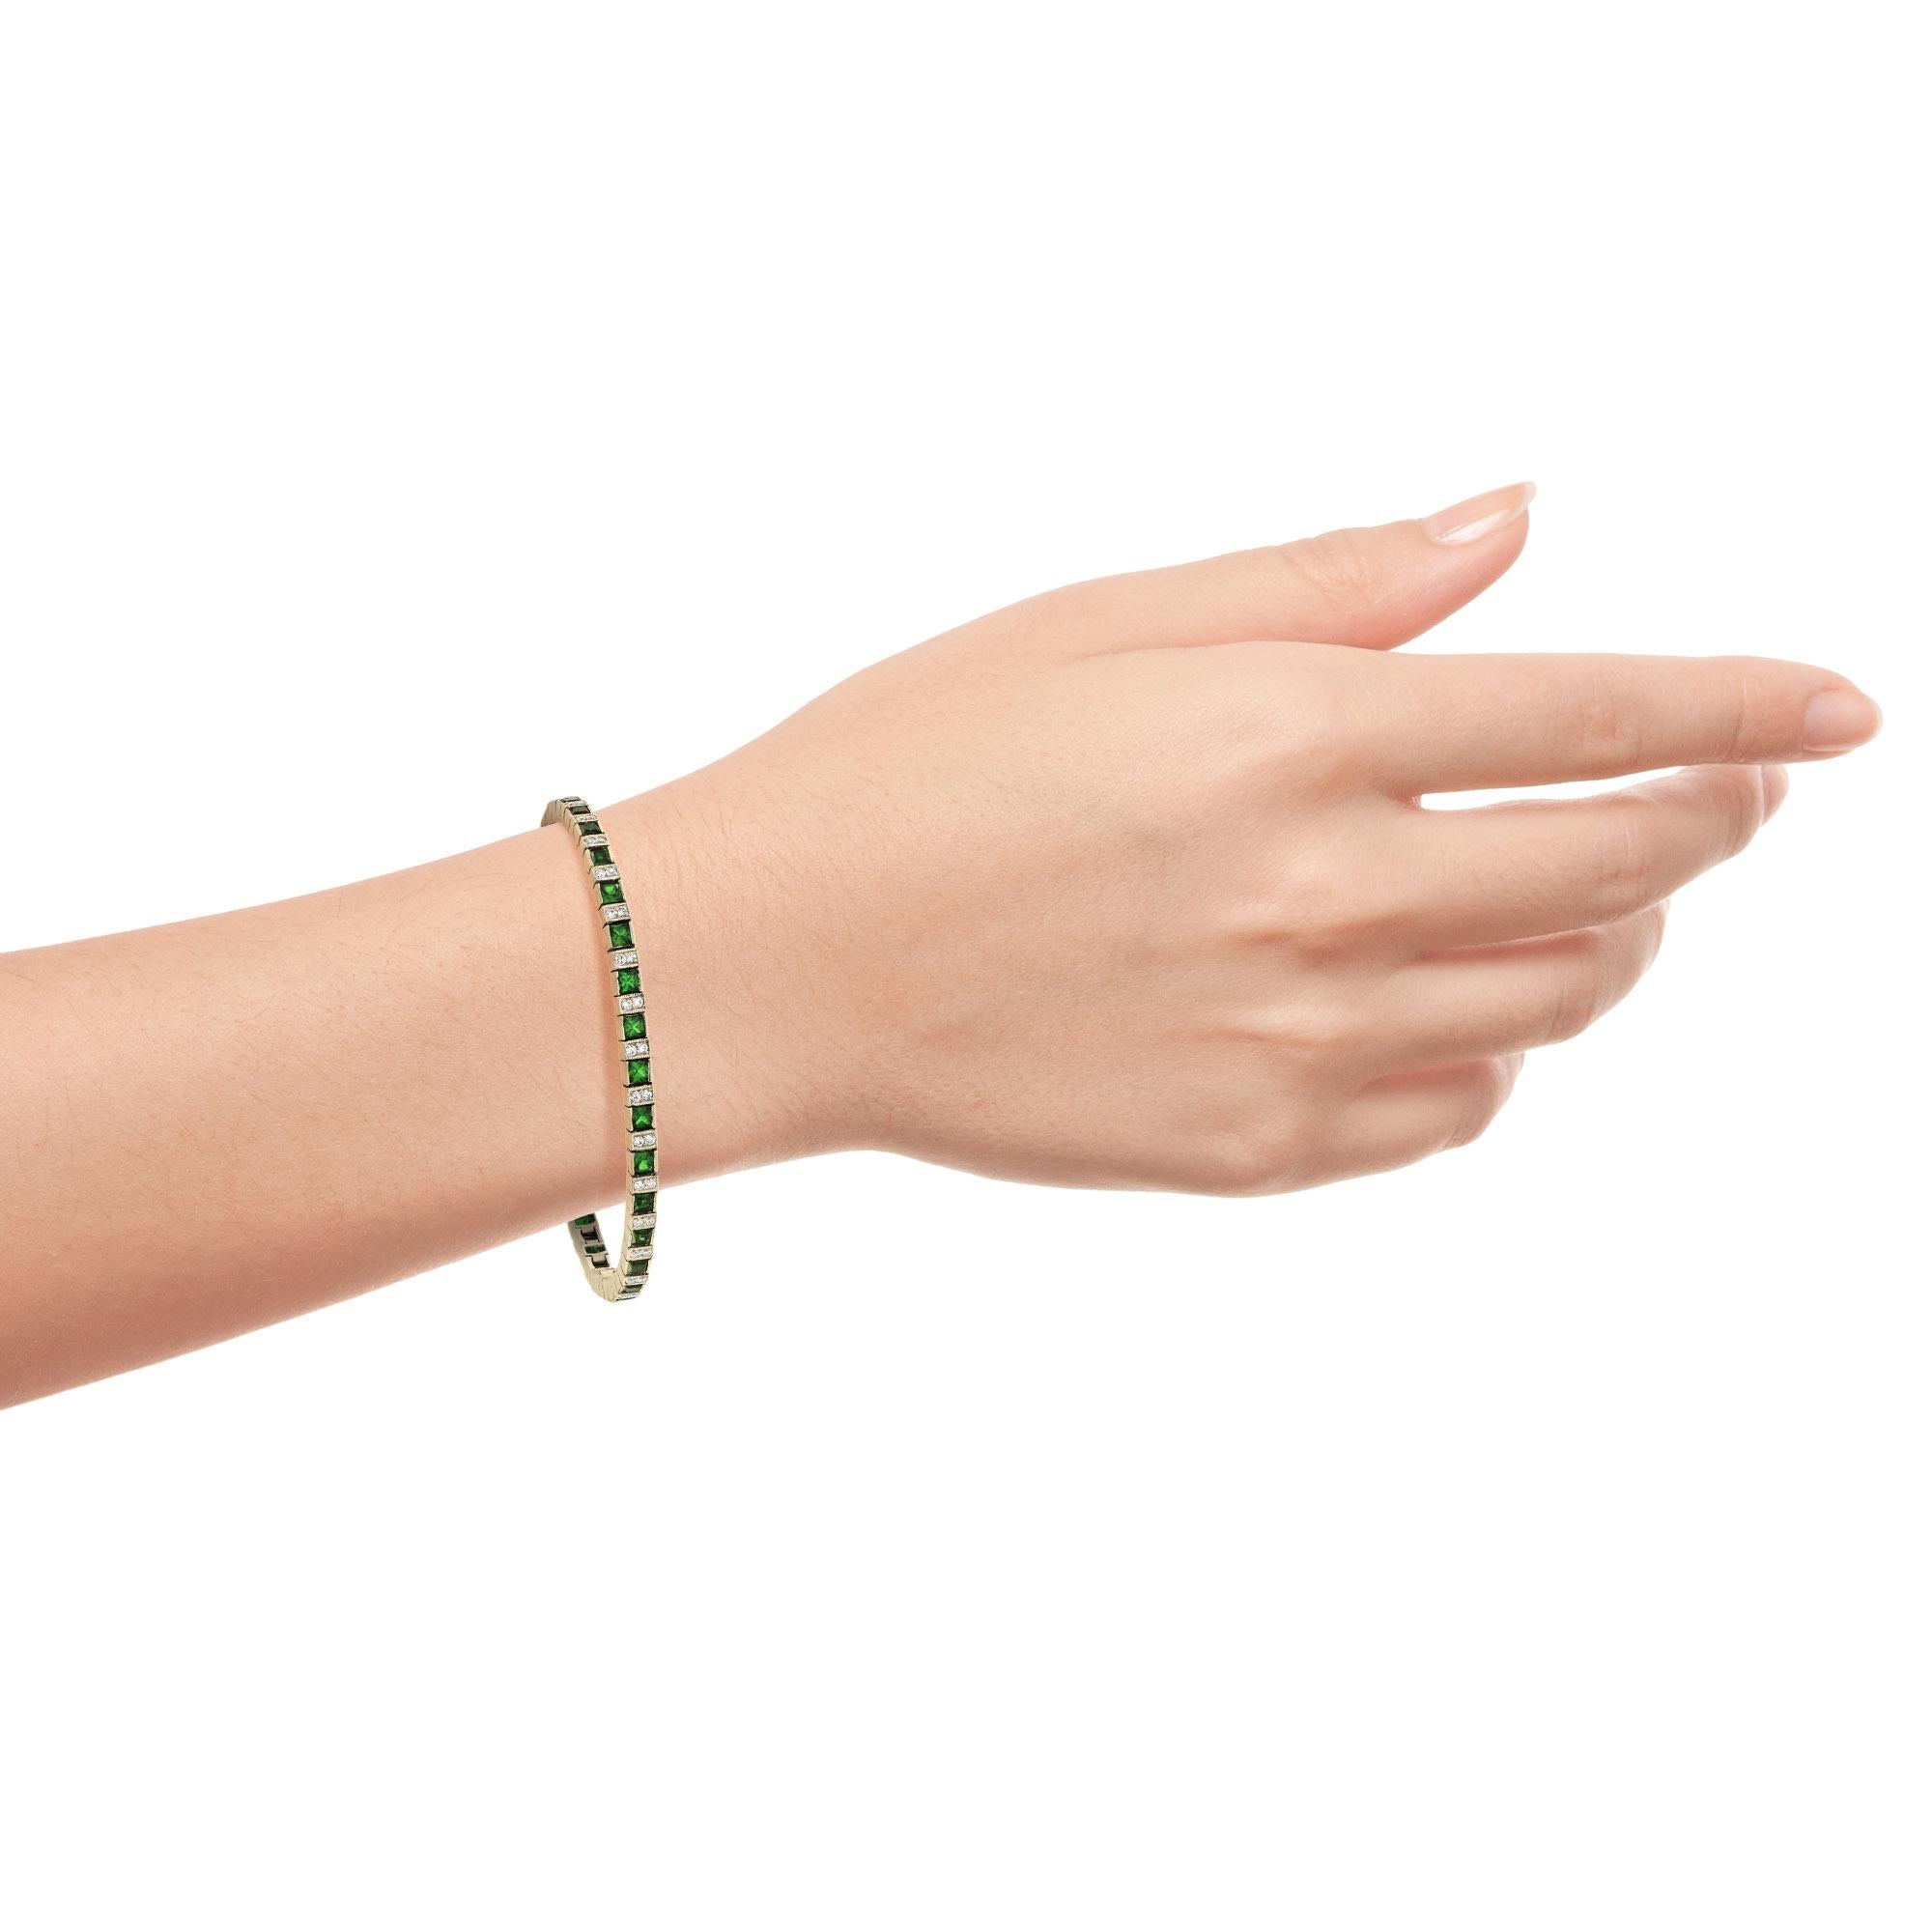 A gorgeous gemstone line bracelet from the Art Deco era! Crafted in 14K yellow gold, this fabulous piece features an alternating pattern comprised of sections of emeralds and diamonds. The bracelet fastens at a push clasp seamlessly hidden within